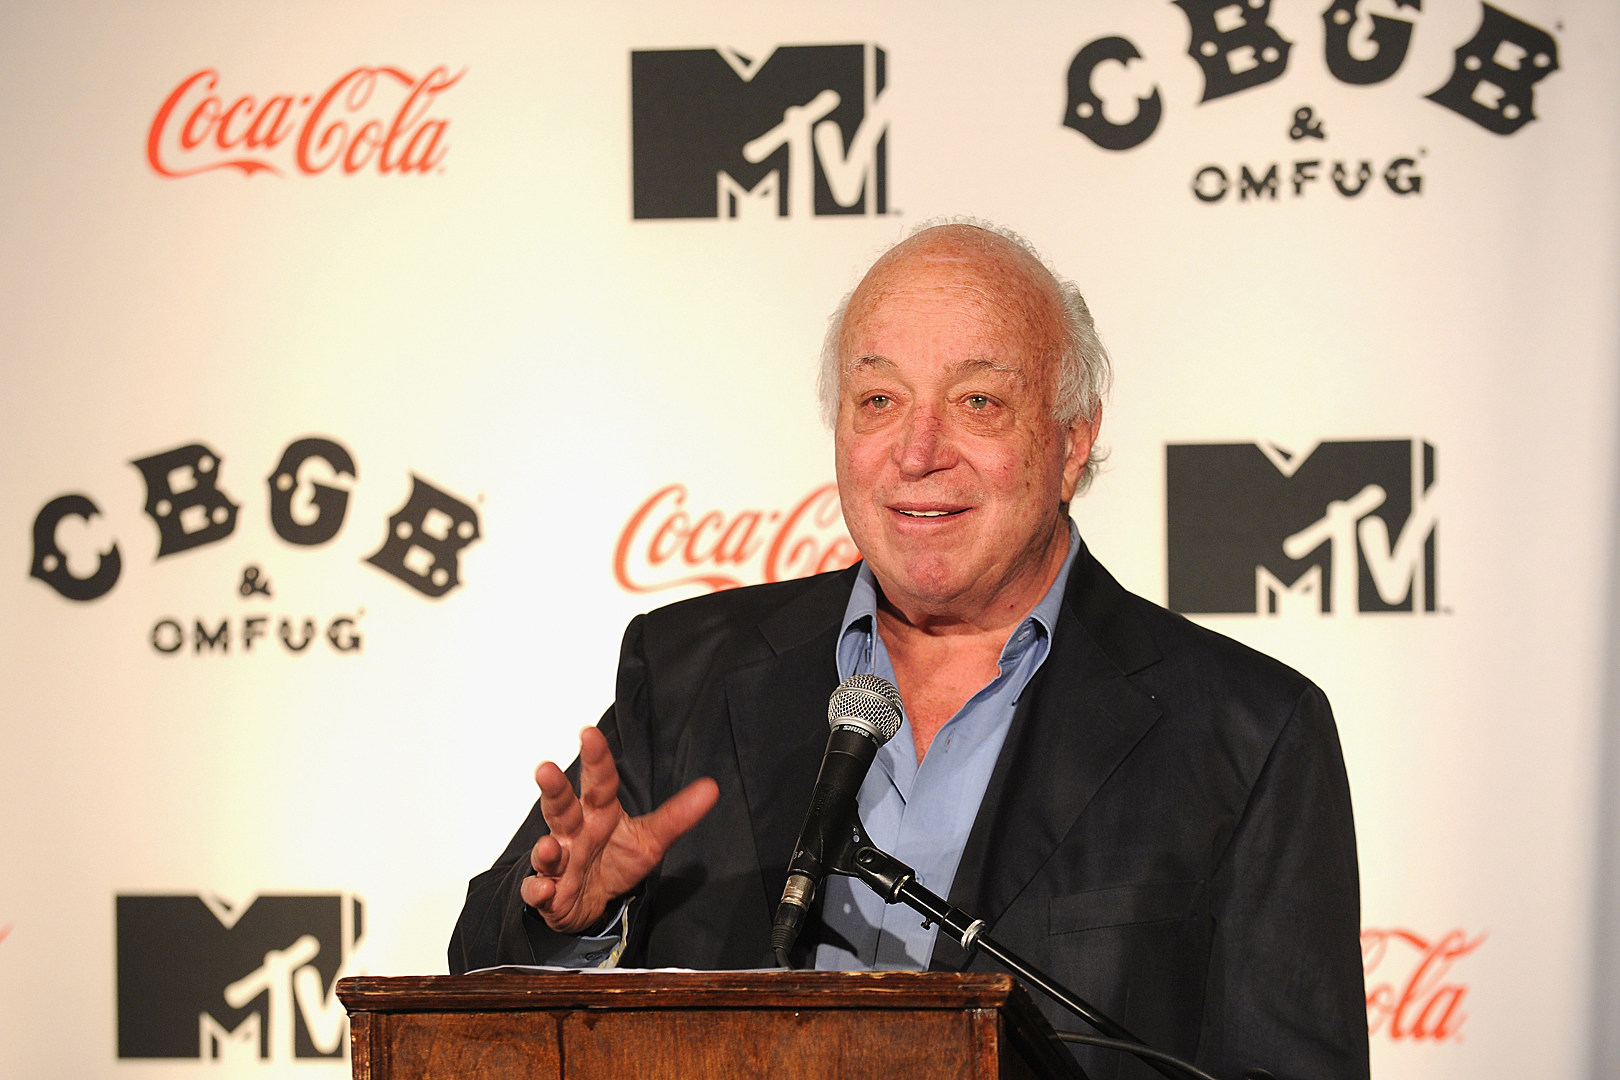 Seymour Stein, Sire Records Co-Founder Who Signed Ramones, Died